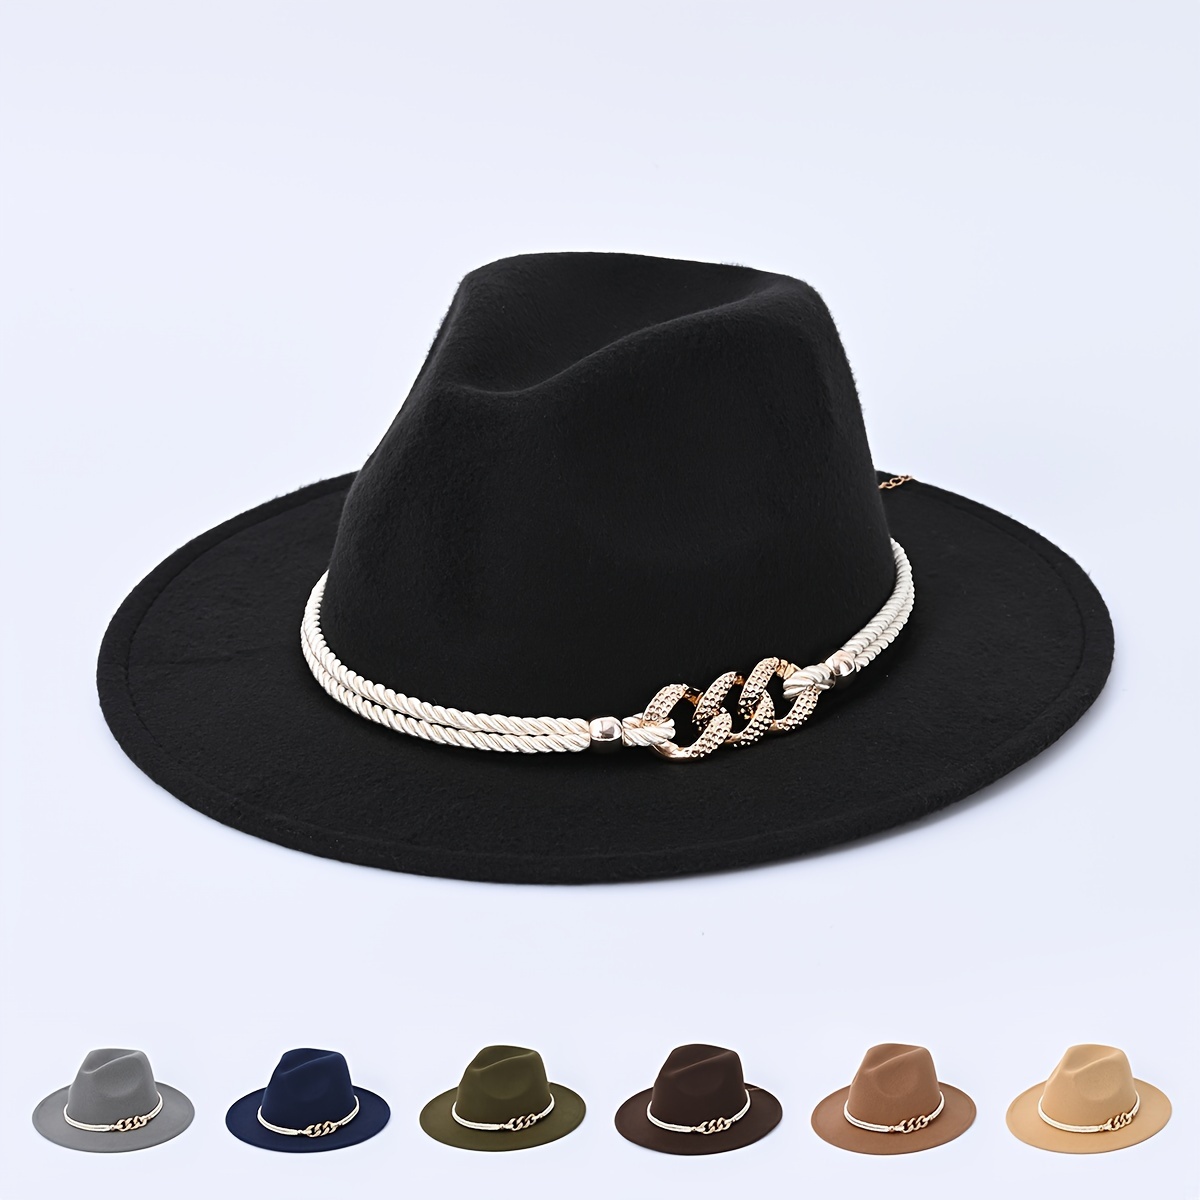 1pc Unisex Breathable Sunshade Cowboy Hat With Bow Feather Belt Buckle And Braided Rope Accessories For Outdoor Casual Camping Fishing